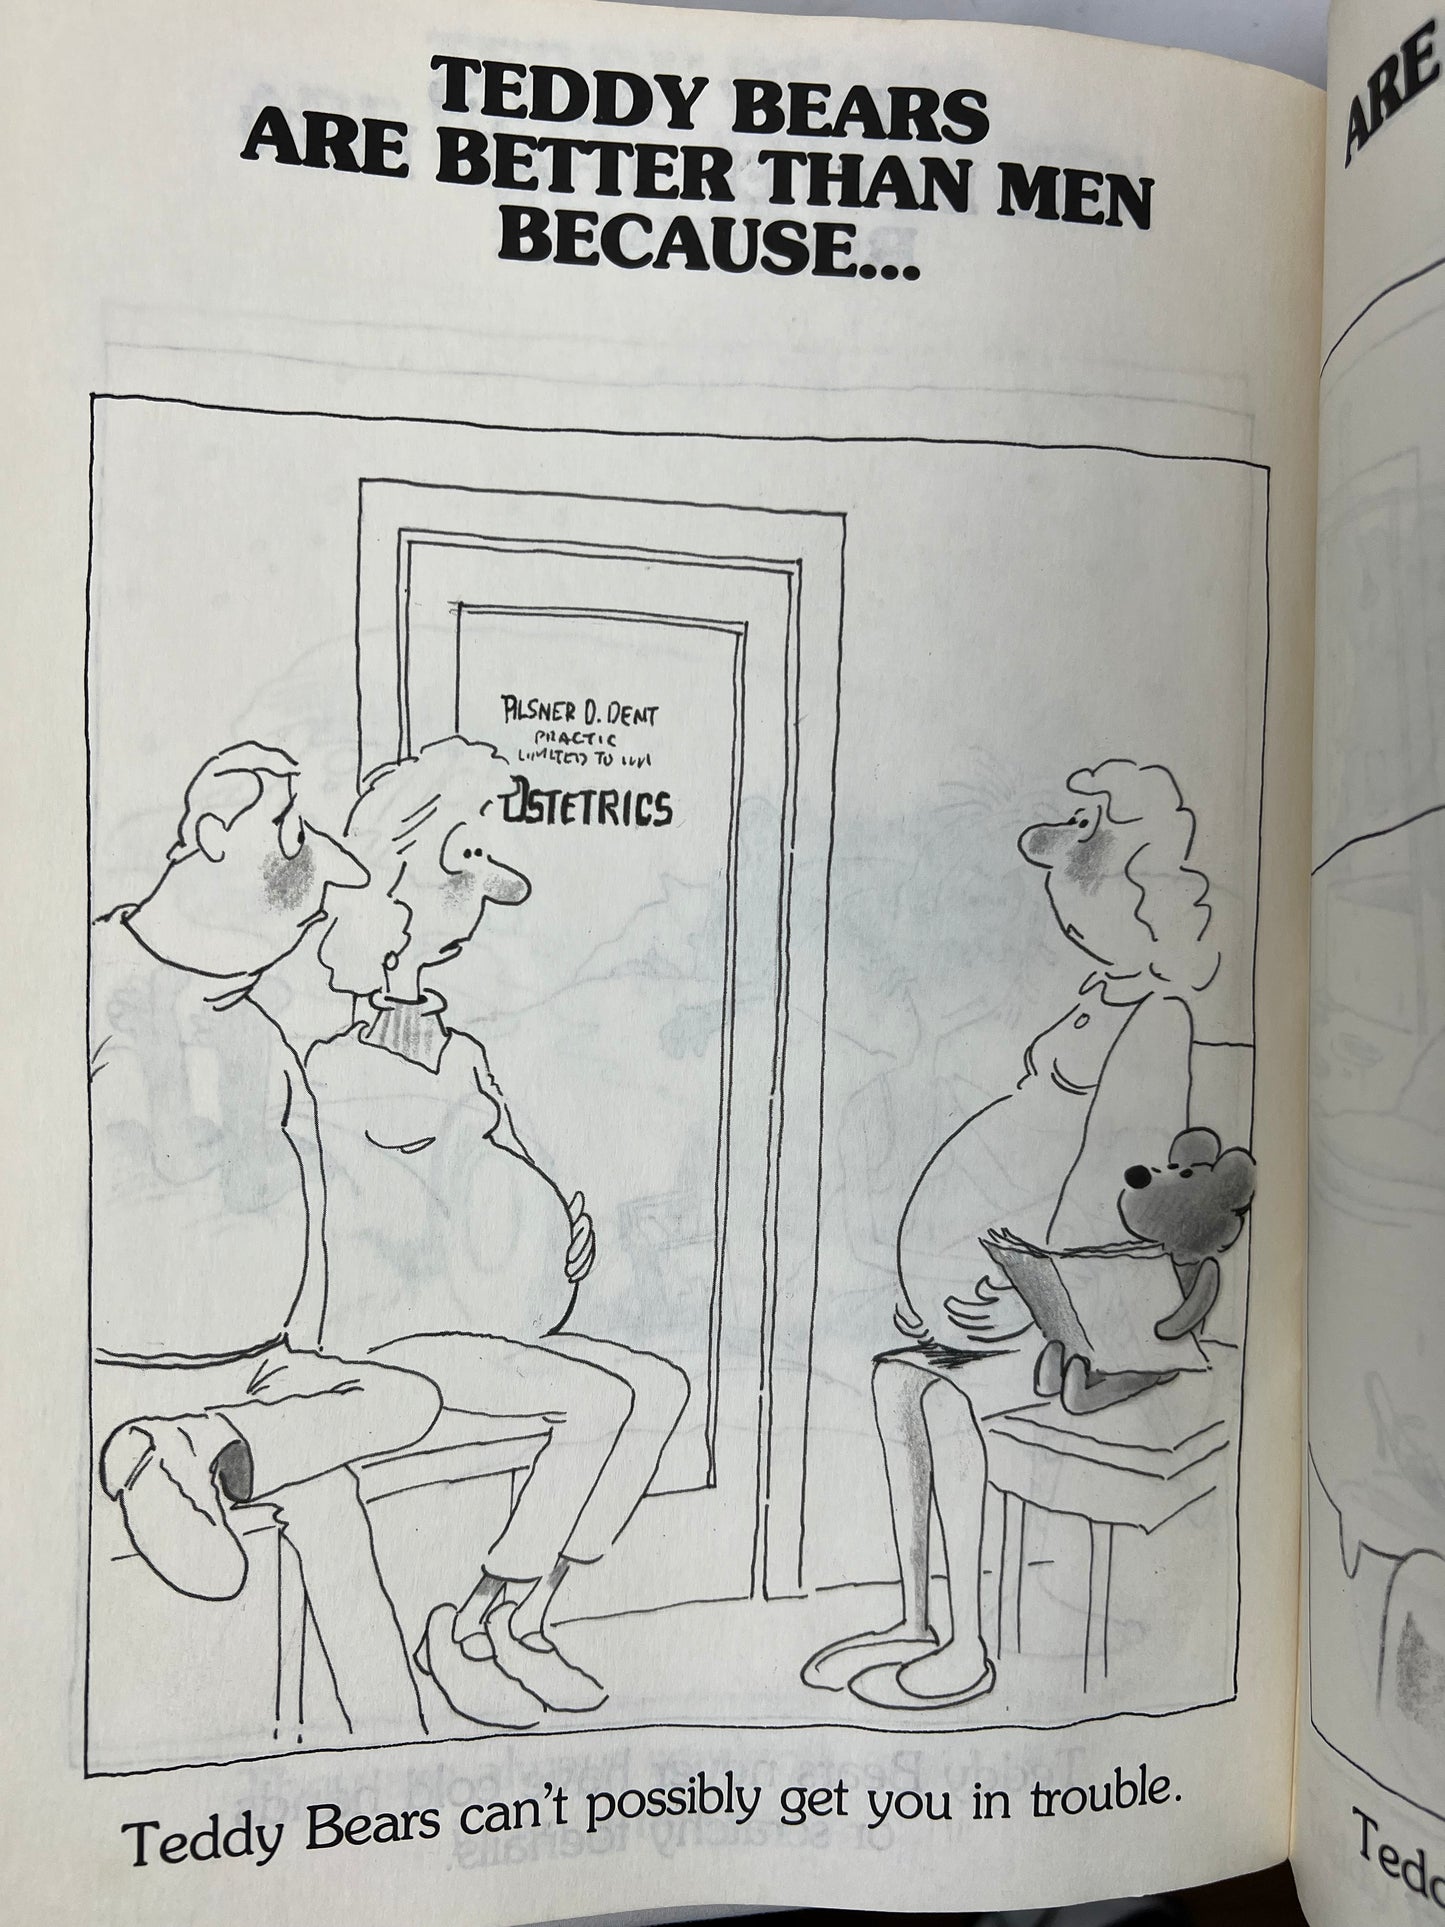 1988 Teddy Bears are Better than Men Because….Funny Satire Book